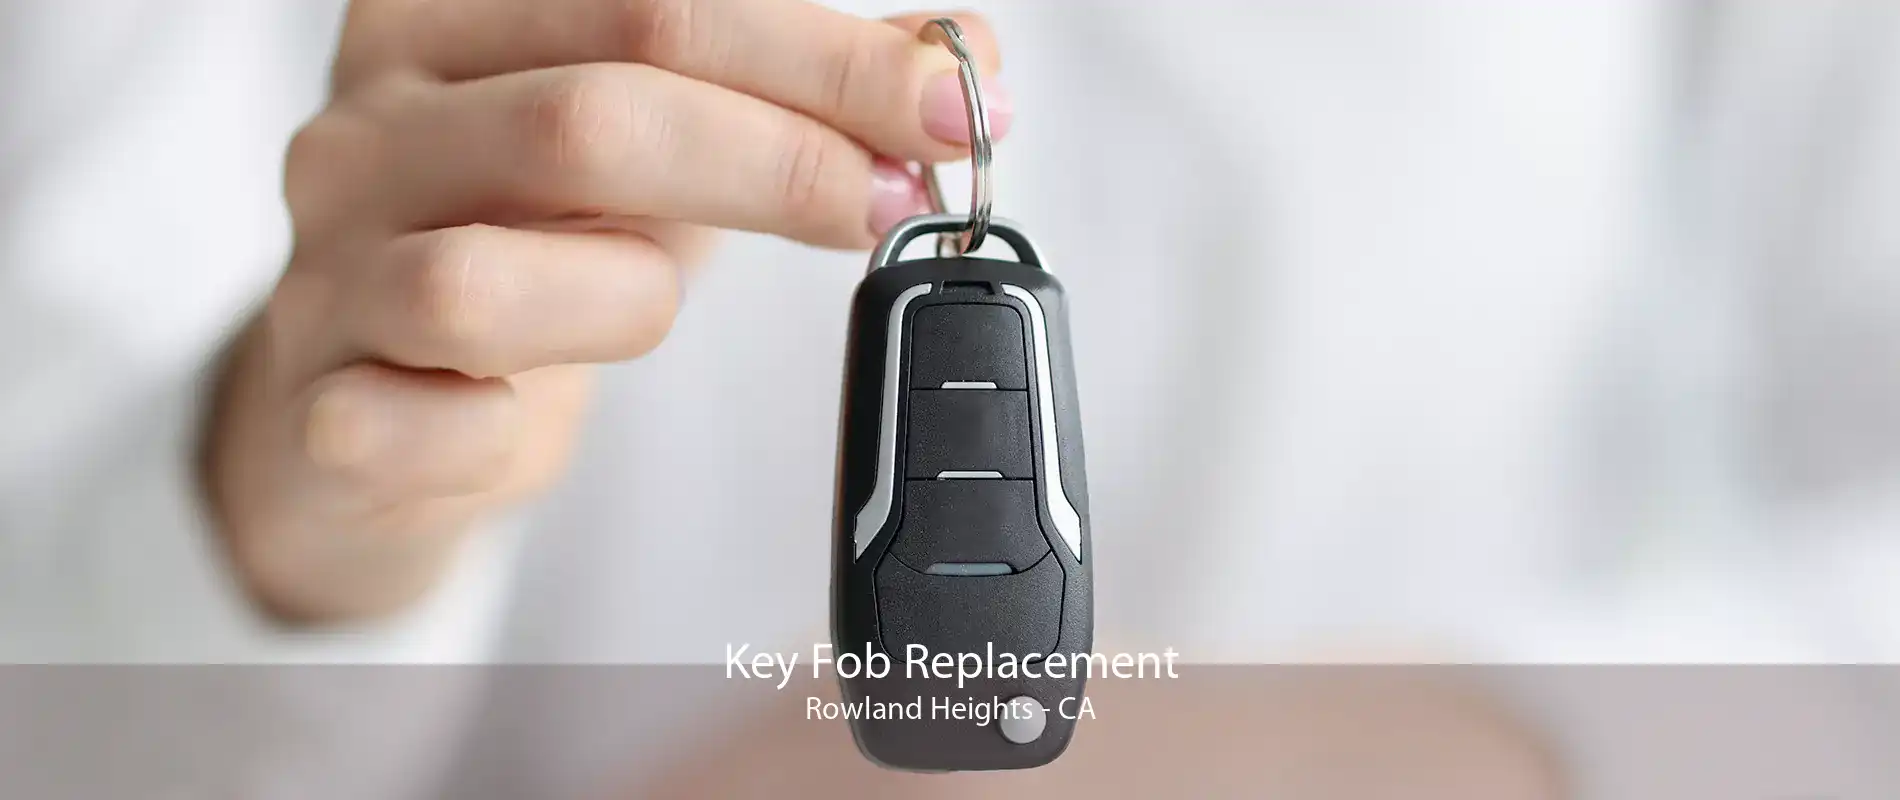 Key Fob Replacement Rowland Heights - CA